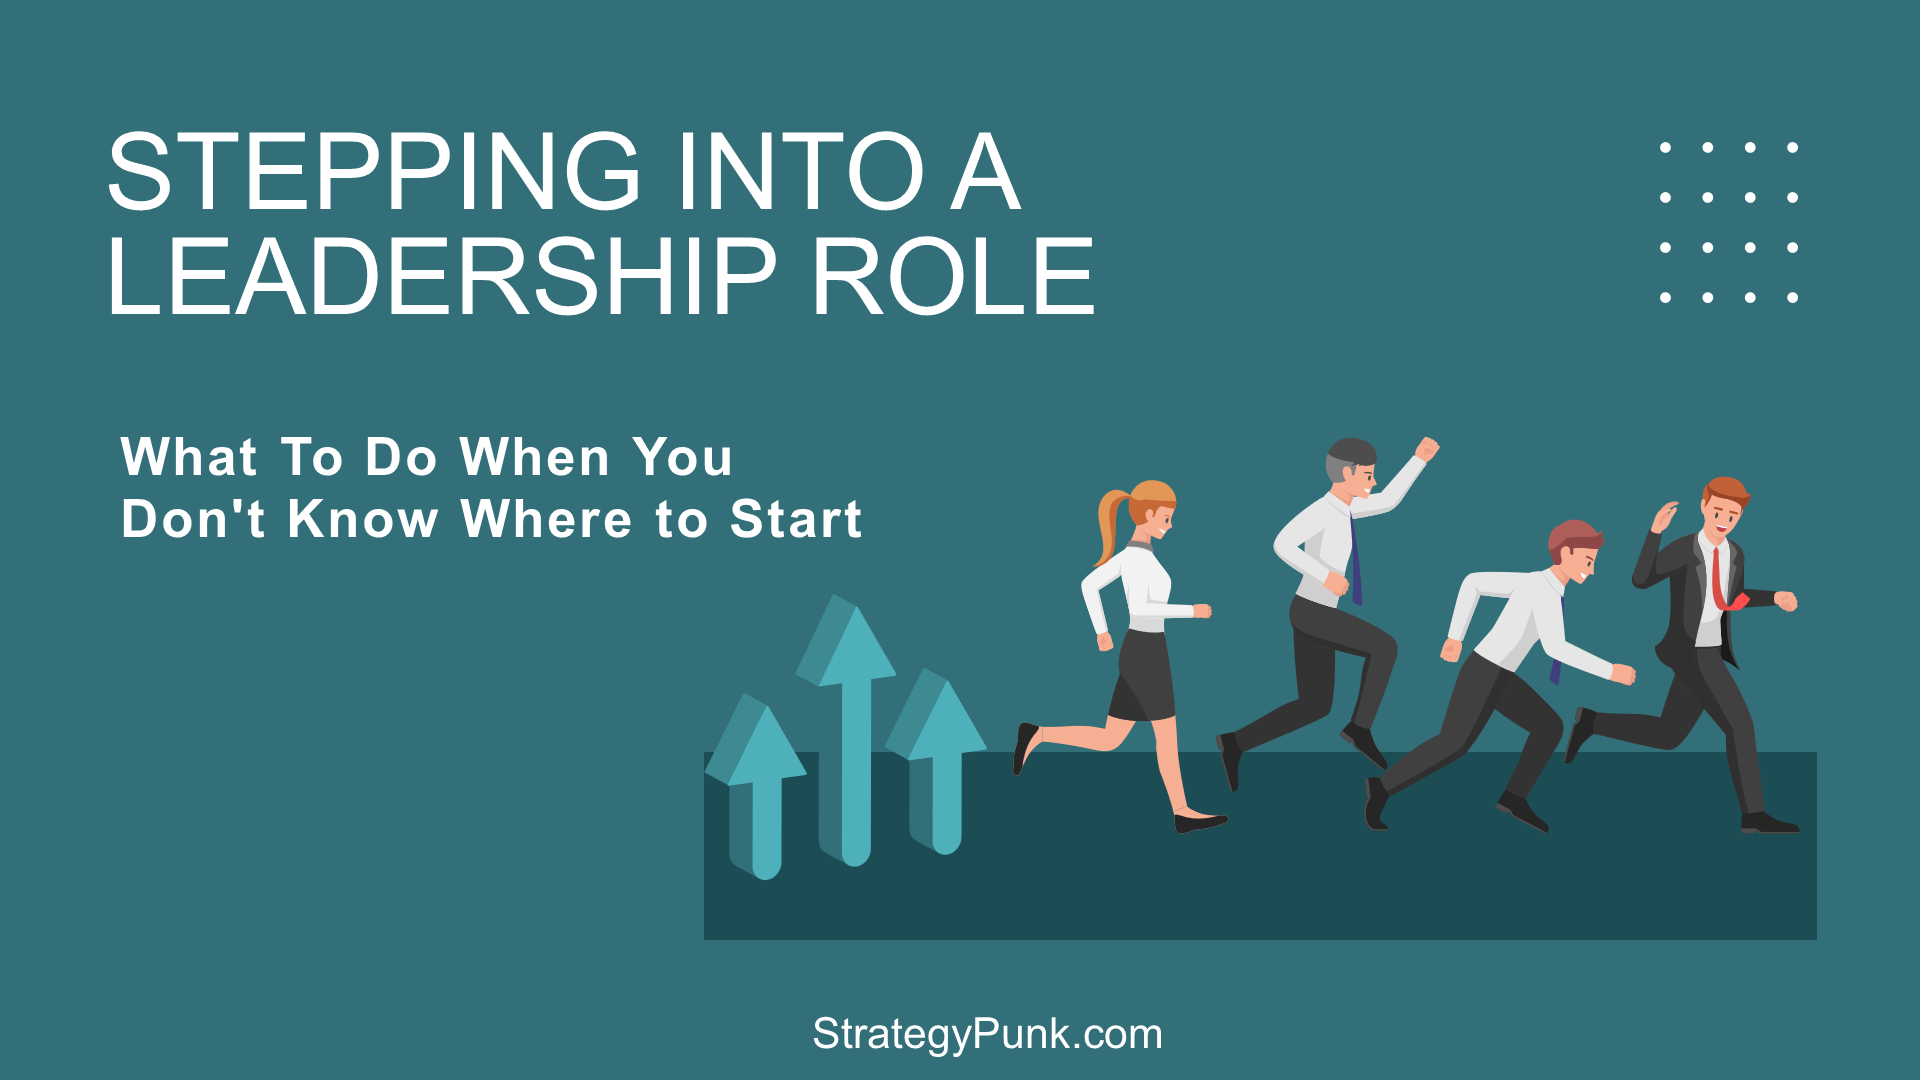 Stepping into a Leadership Role: What To Do When You Don't Know Where to Start